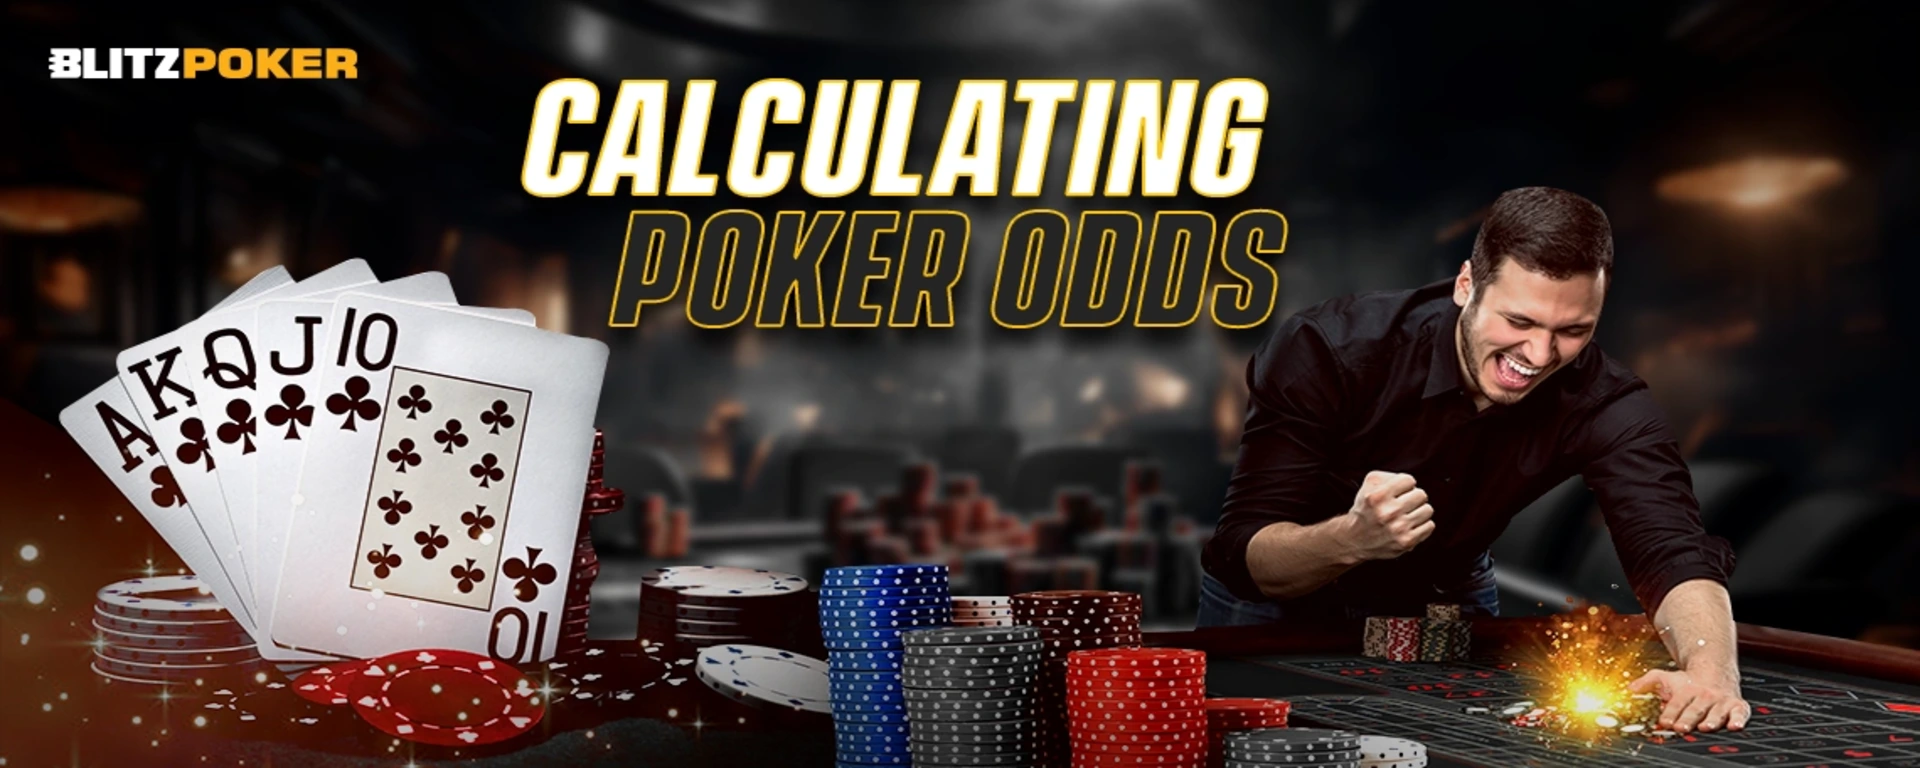 Calculating Poker Odds : Learn How To Calculate Poker Odds